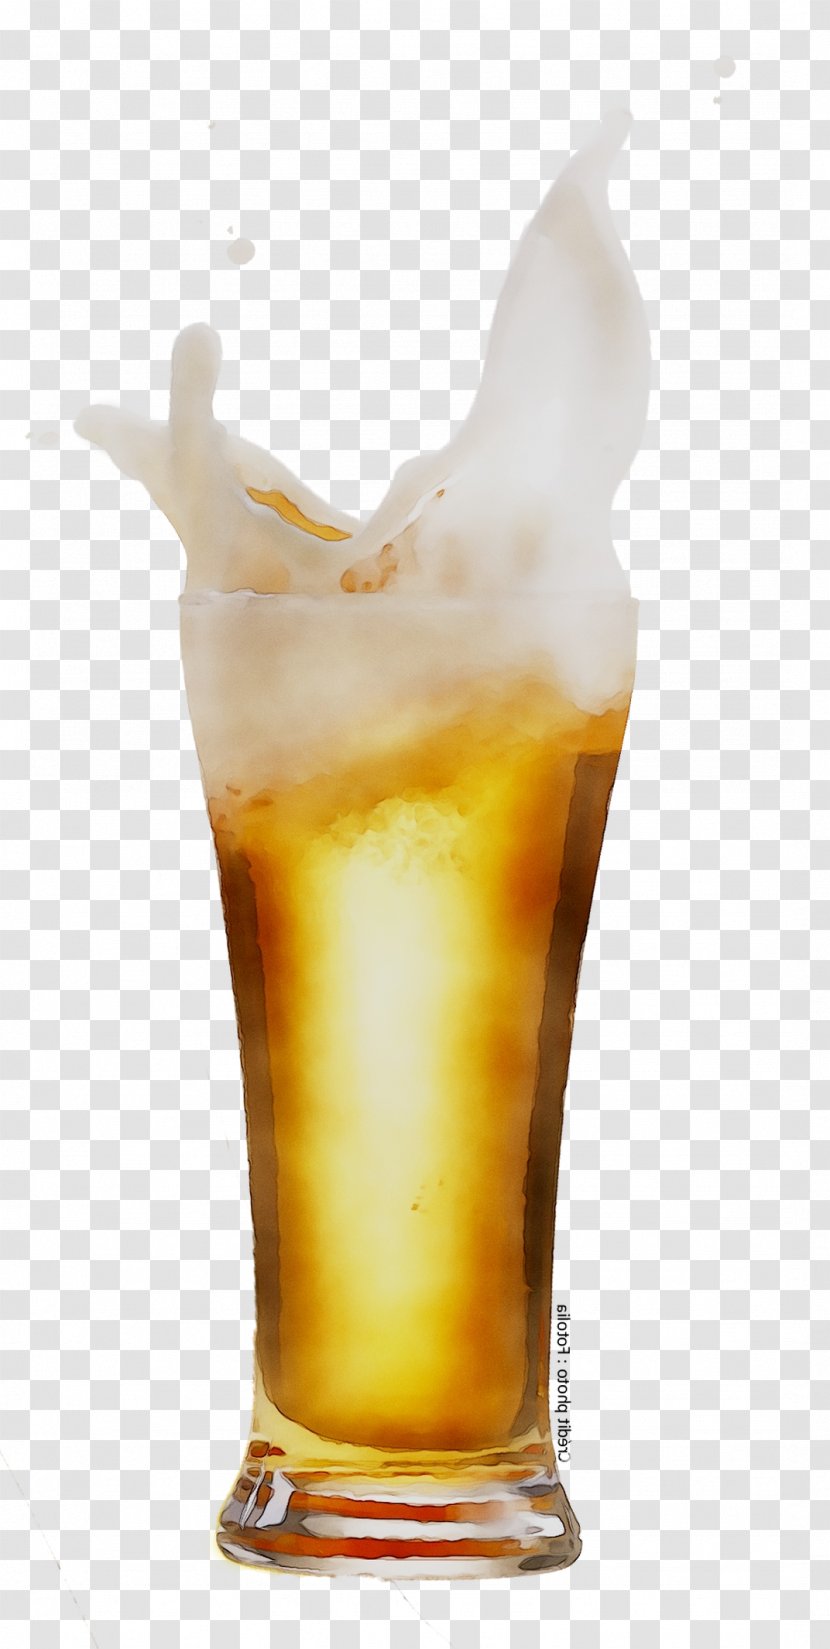 Non-alcoholic Drink Iced Tea Beer Glasses Sweetened Beverage - Alcoholic Transparent PNG